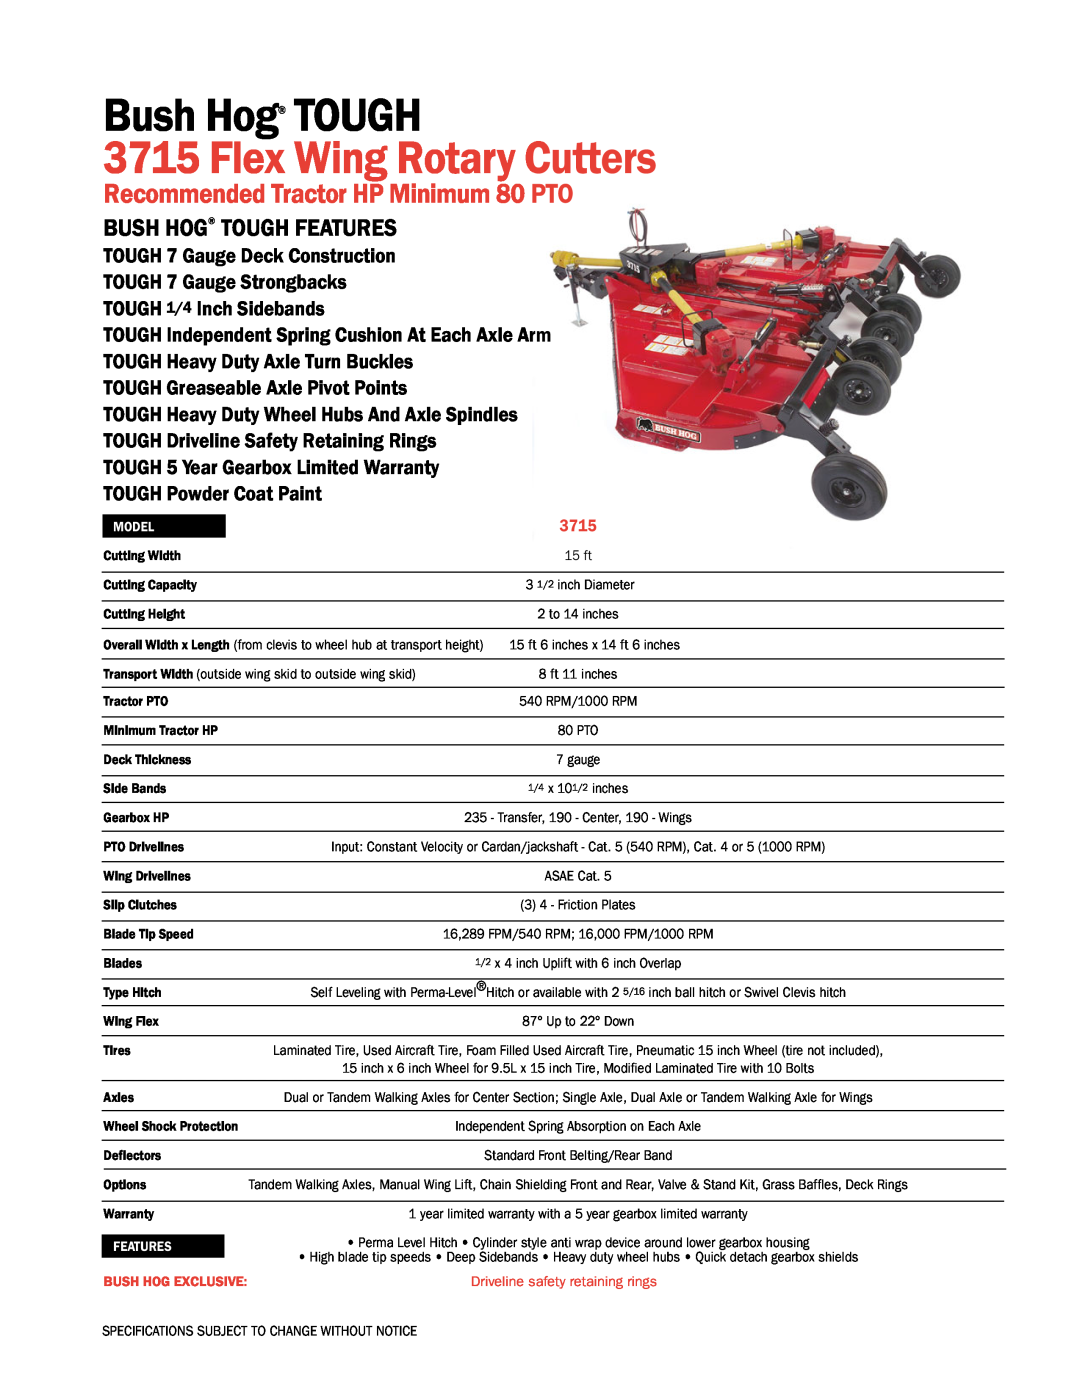 Bush Hog 3715 specifications Bush Hog TOUGH, Flex Wing Rotary Cutters, Recommended Tractor HP Minimum 80 PTO 